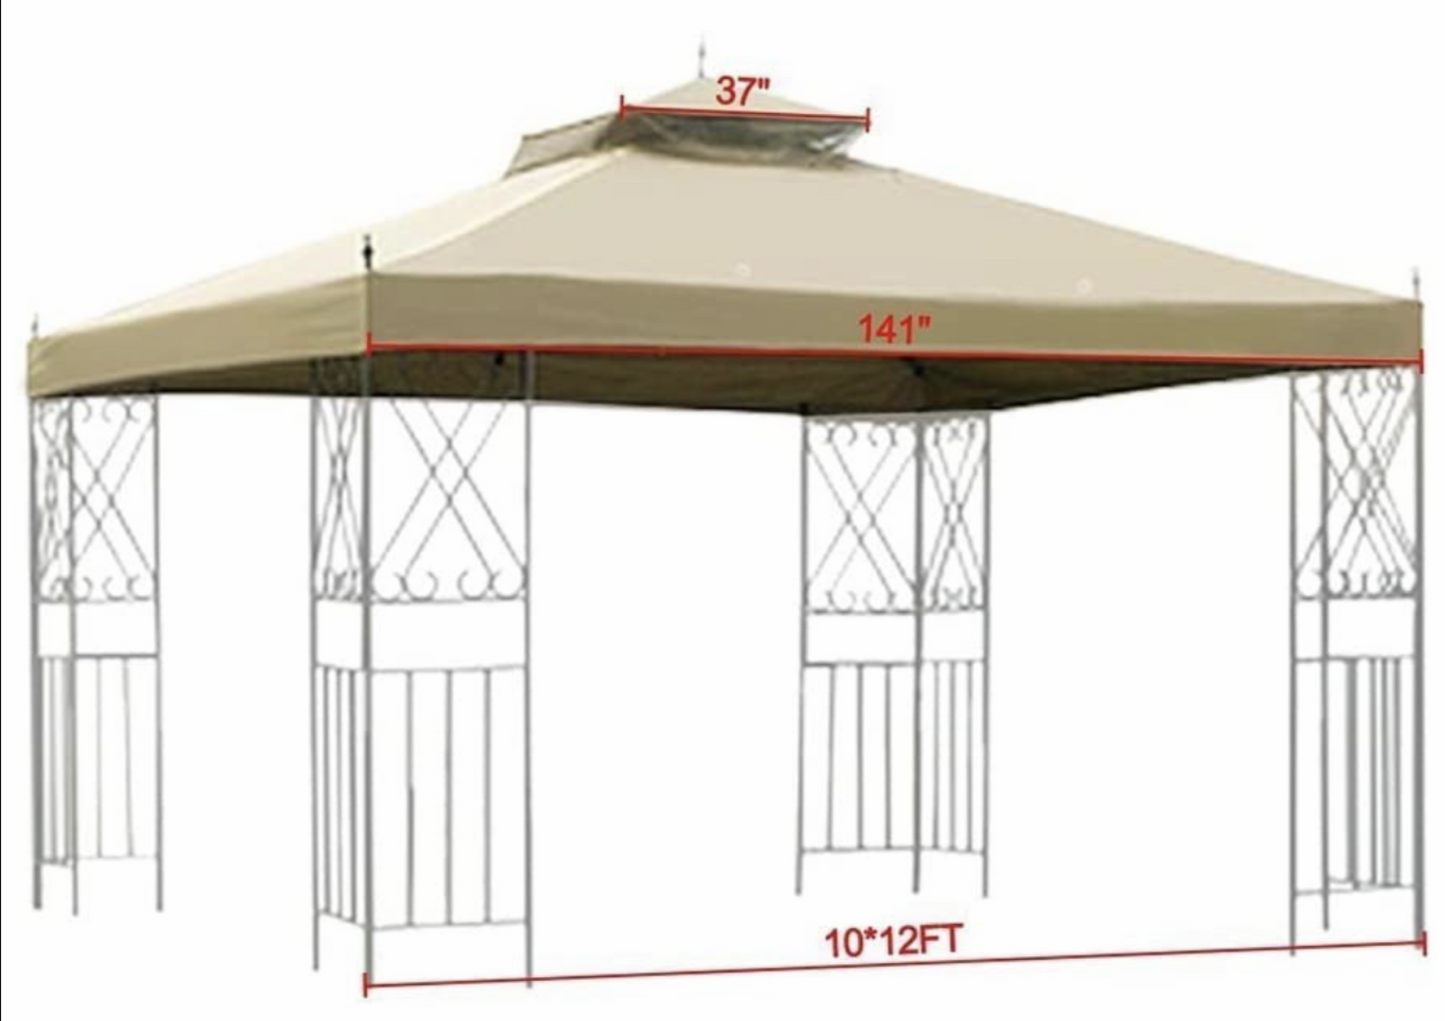 2 Tier 12x10' Gazebo Canopy Top Cover Replacement for Sunjoy L-GZ288PST-4H